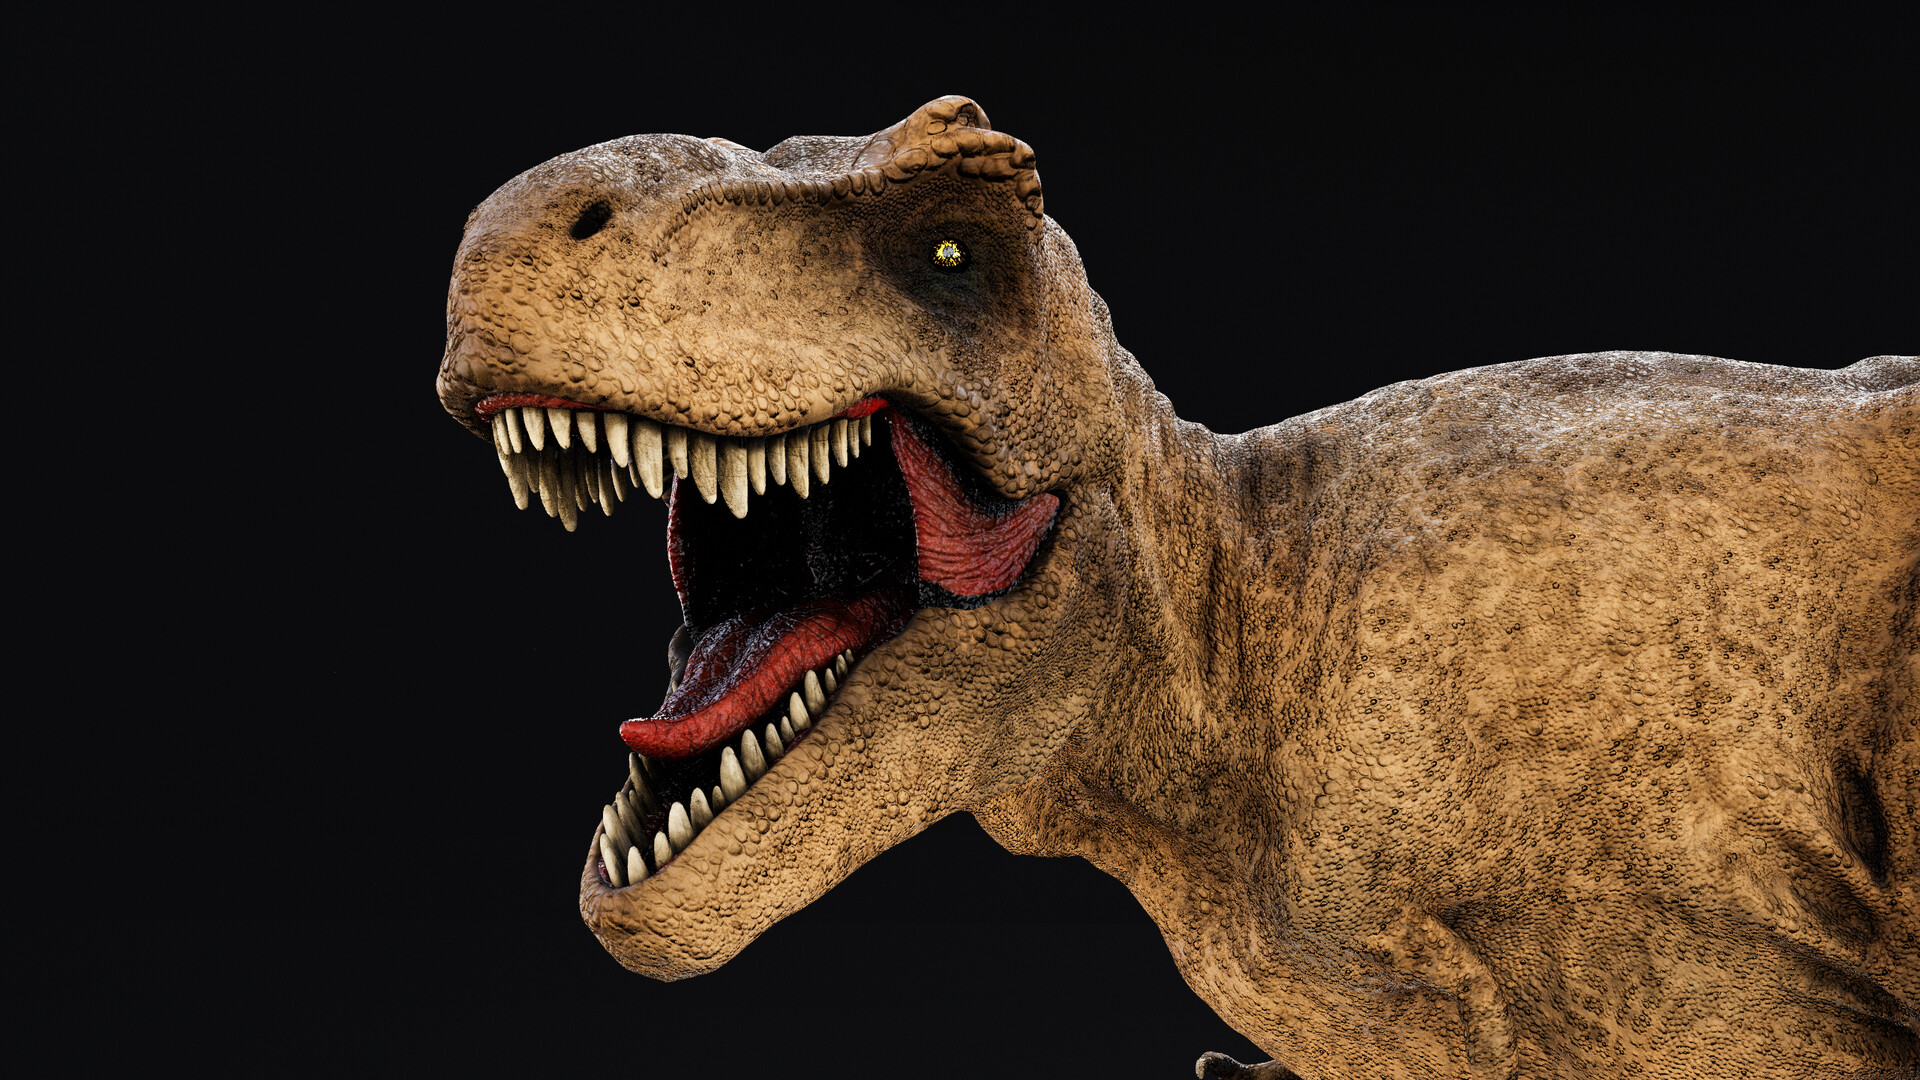 ArtStation - Tyrannosaurus rex photorealistic - First project completed